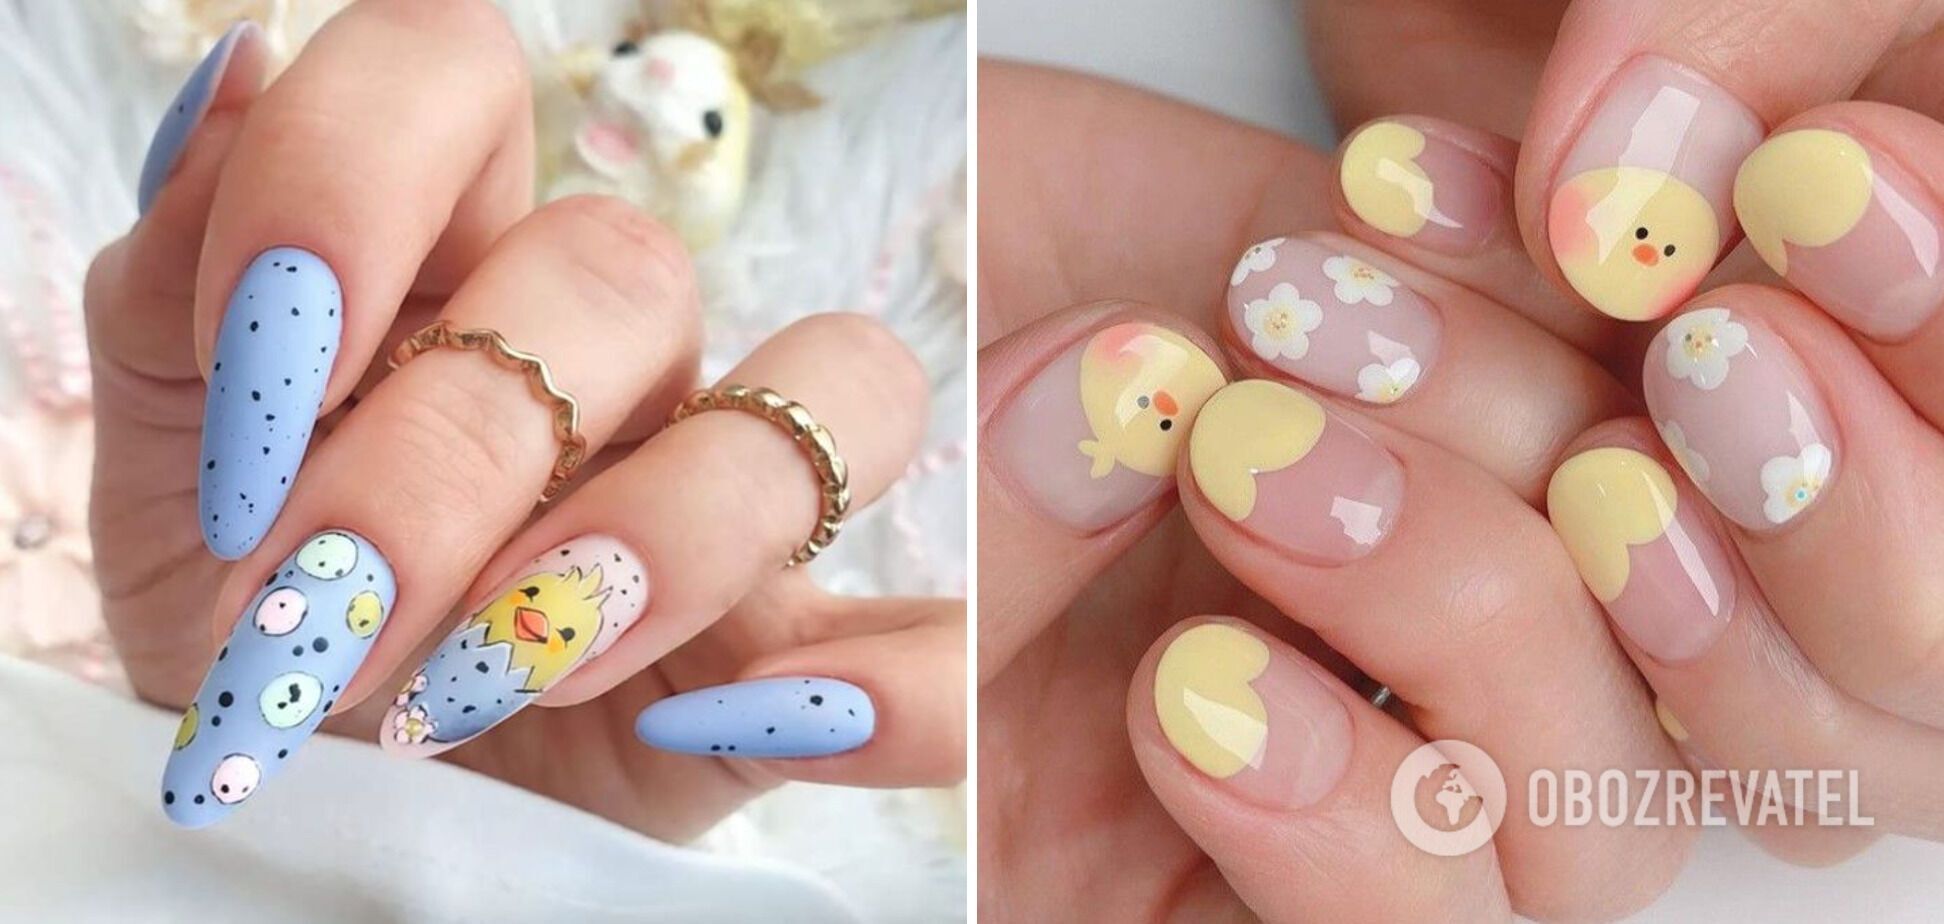 Polka dot nails, eggs and rabbits. 7 stylish manicure ideas for Easter